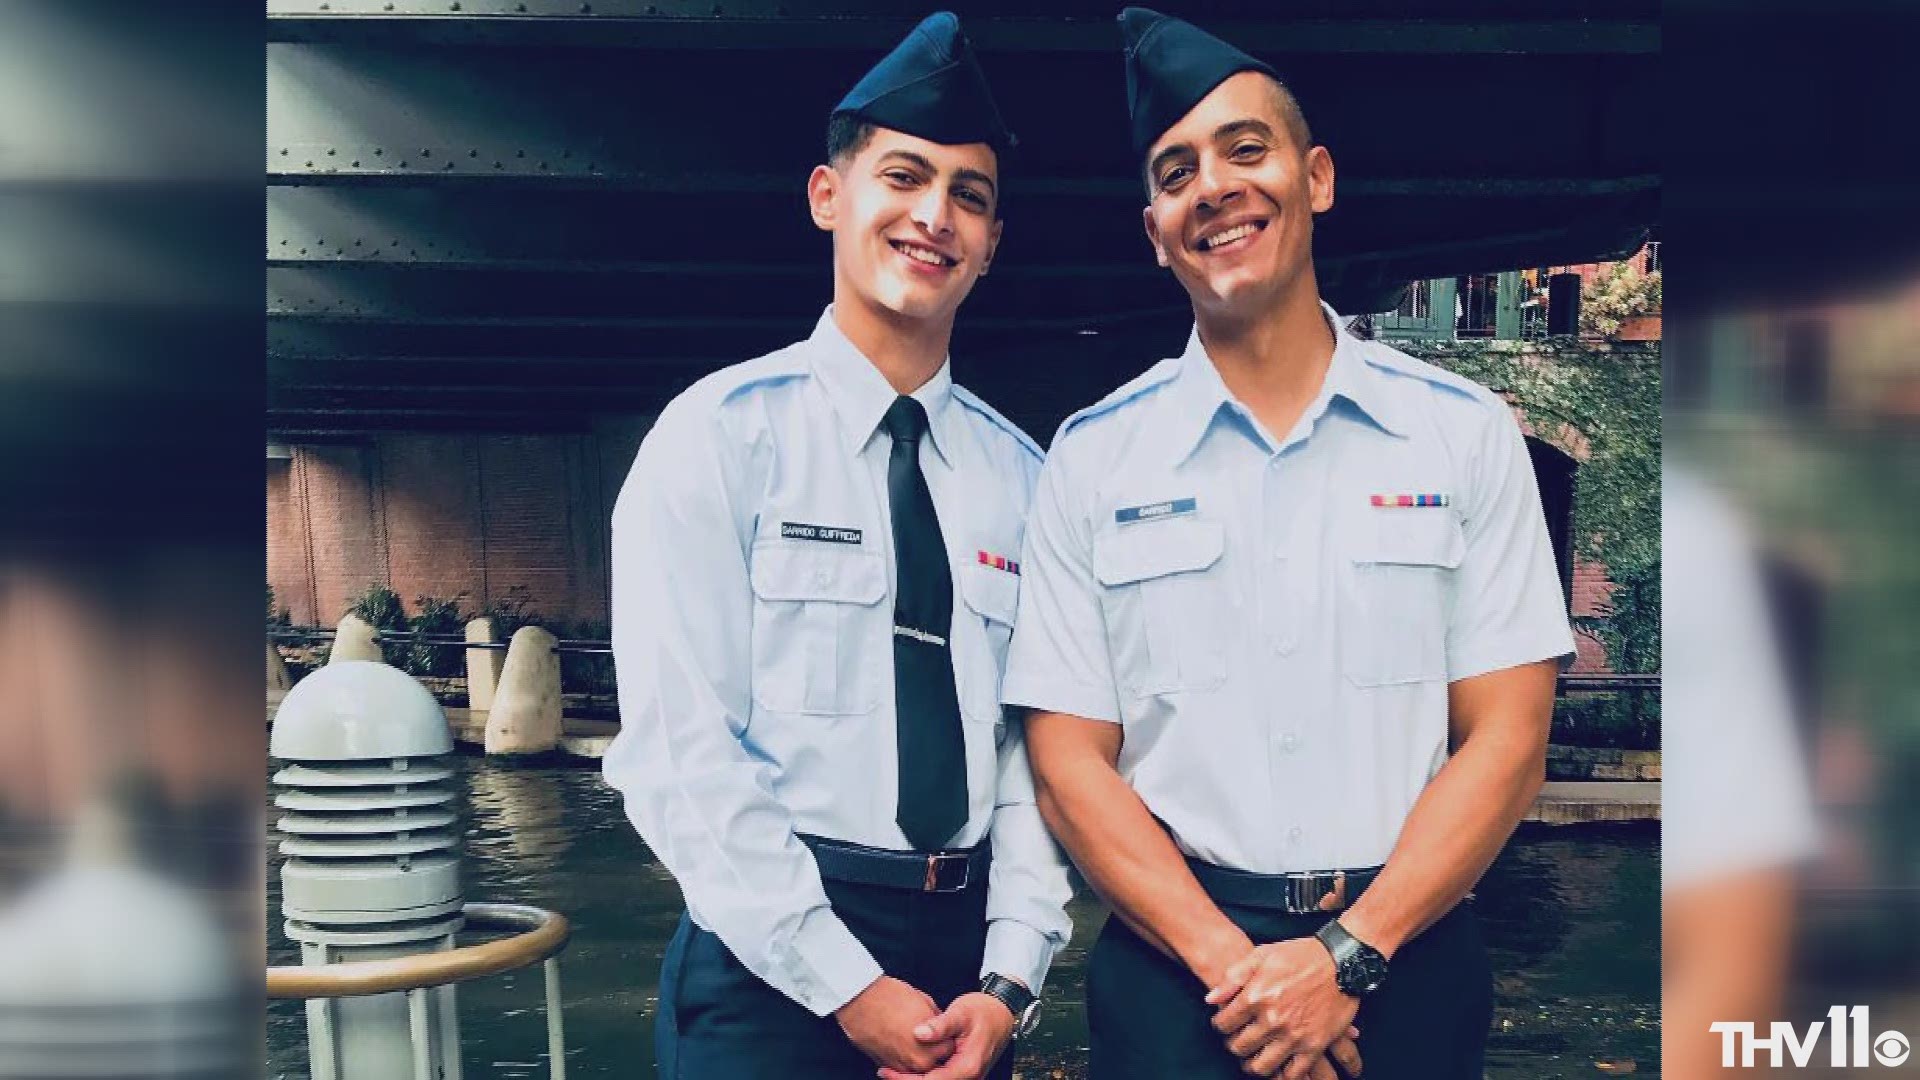 Moises Garrido always dreamed of serving his country, but the timing was never right. When his son turned 18 and had the same dream, they took the first step together and went to the recruiter’s office.